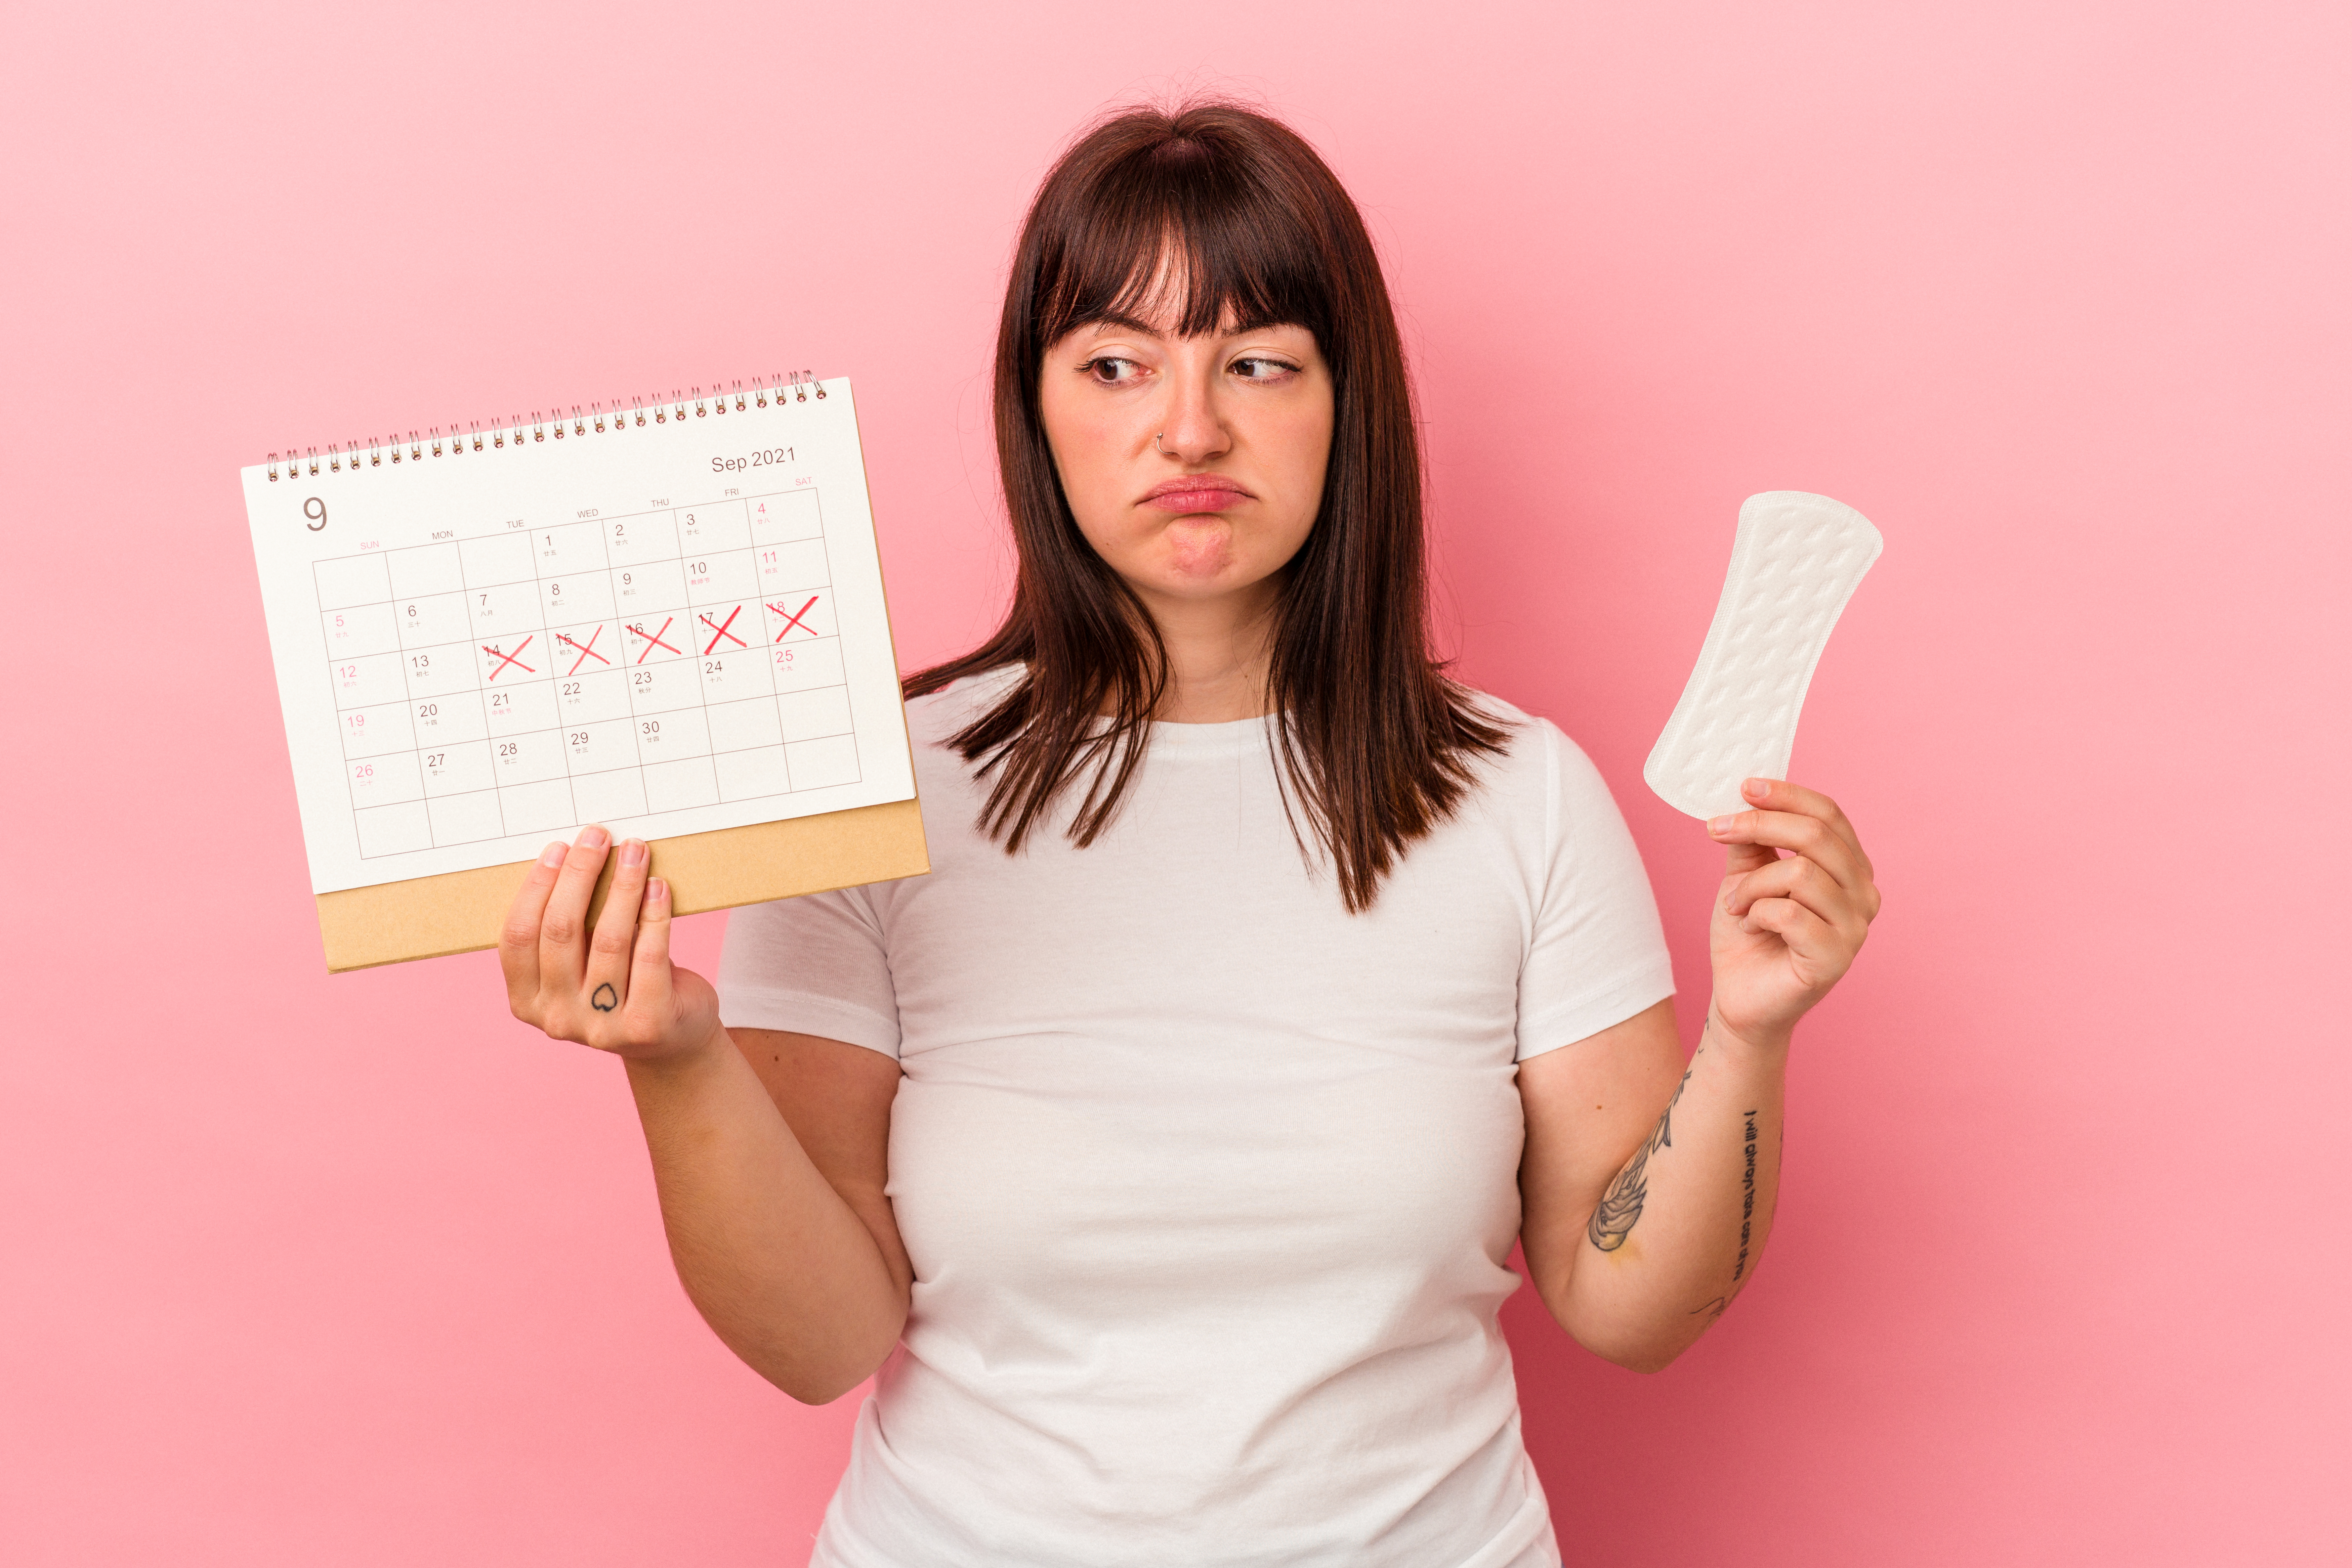 Woman holding a calendar and a pad